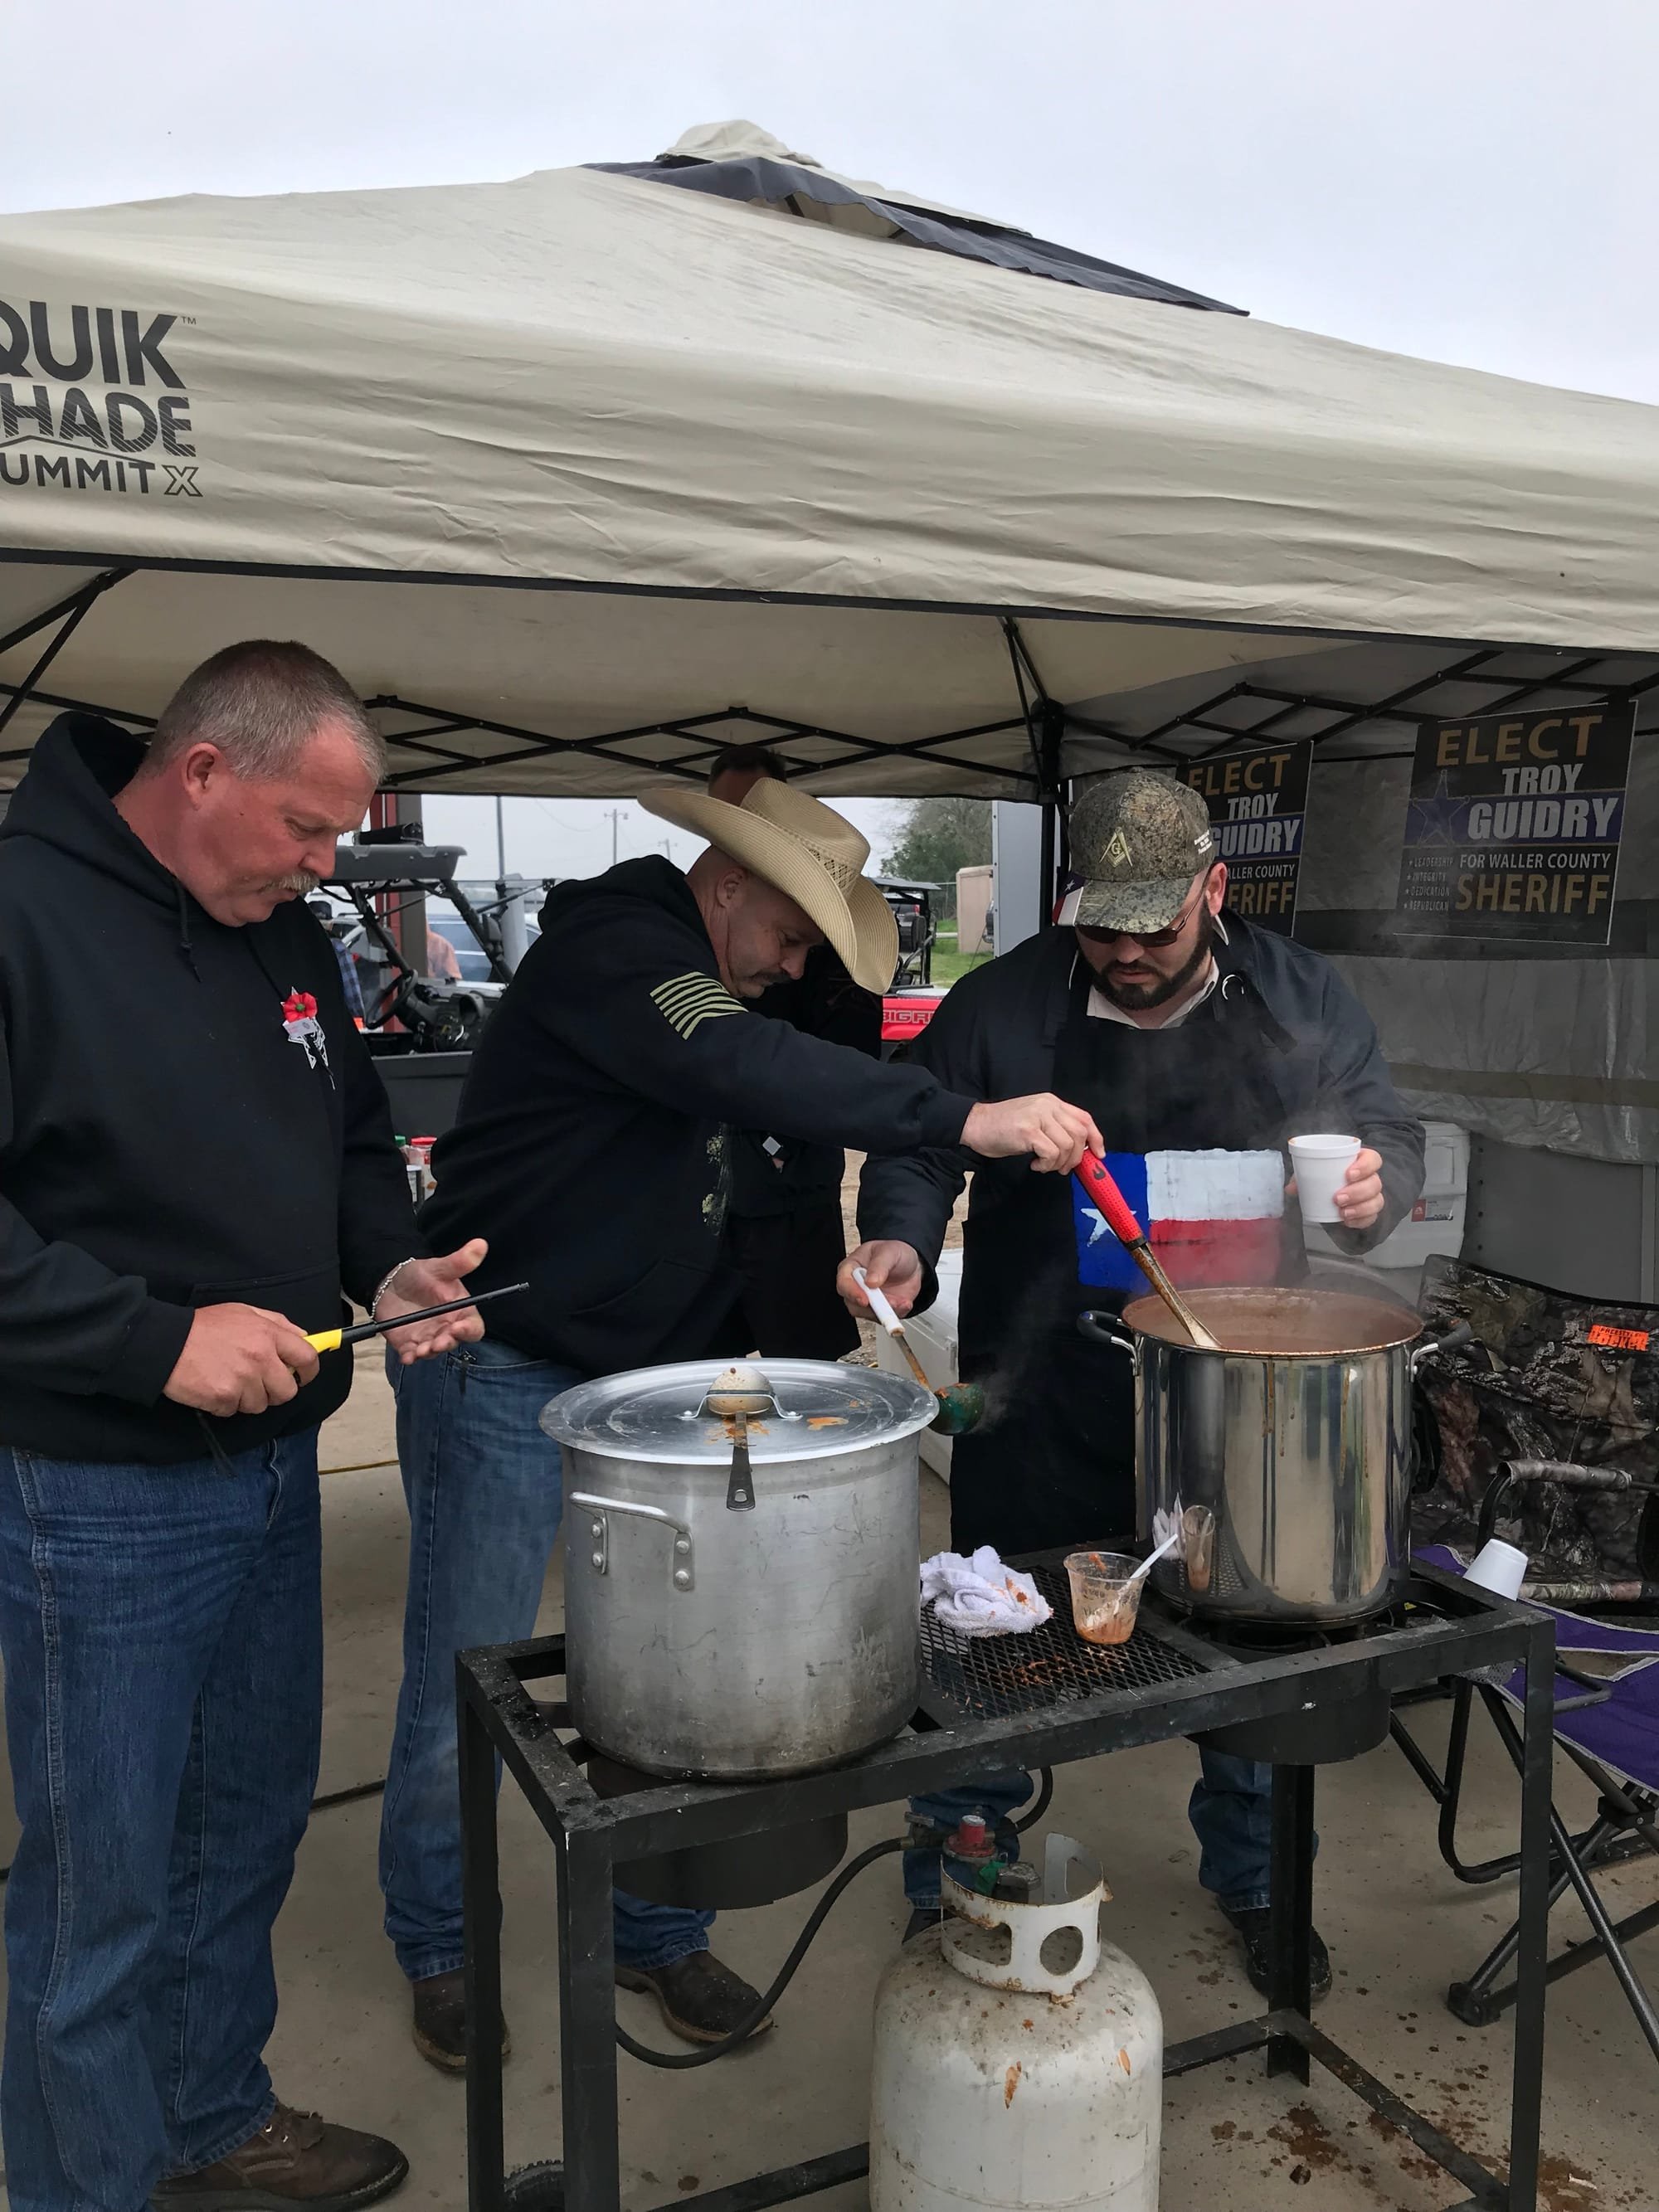 8th Annual John Crowhurst memorial Chili Cook-off and Car Show